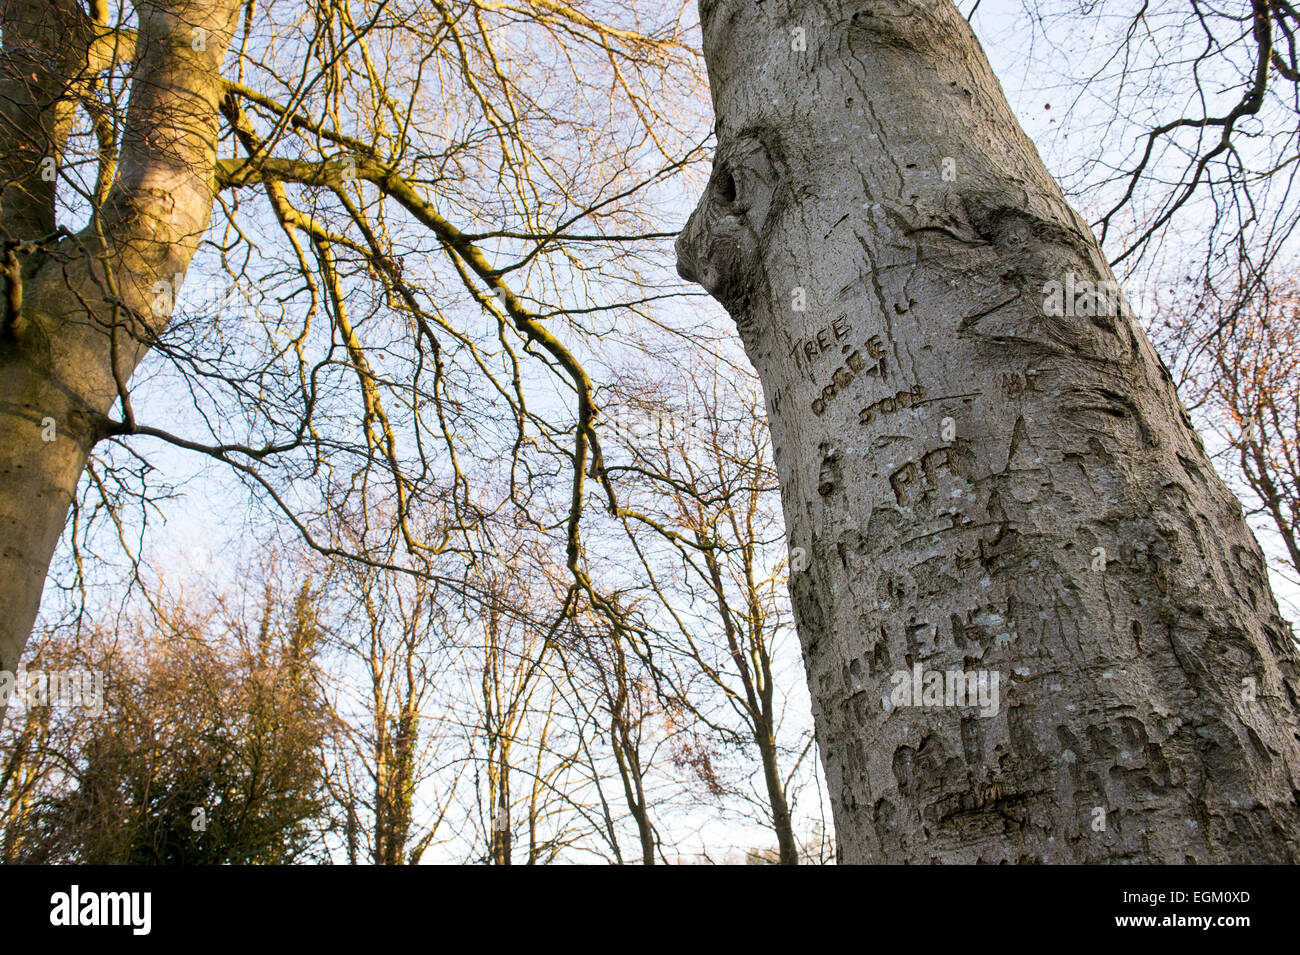 Carved graffiti names and initials in the bark of a beech tree trunk. Oxfordshire, UK Stock Photo